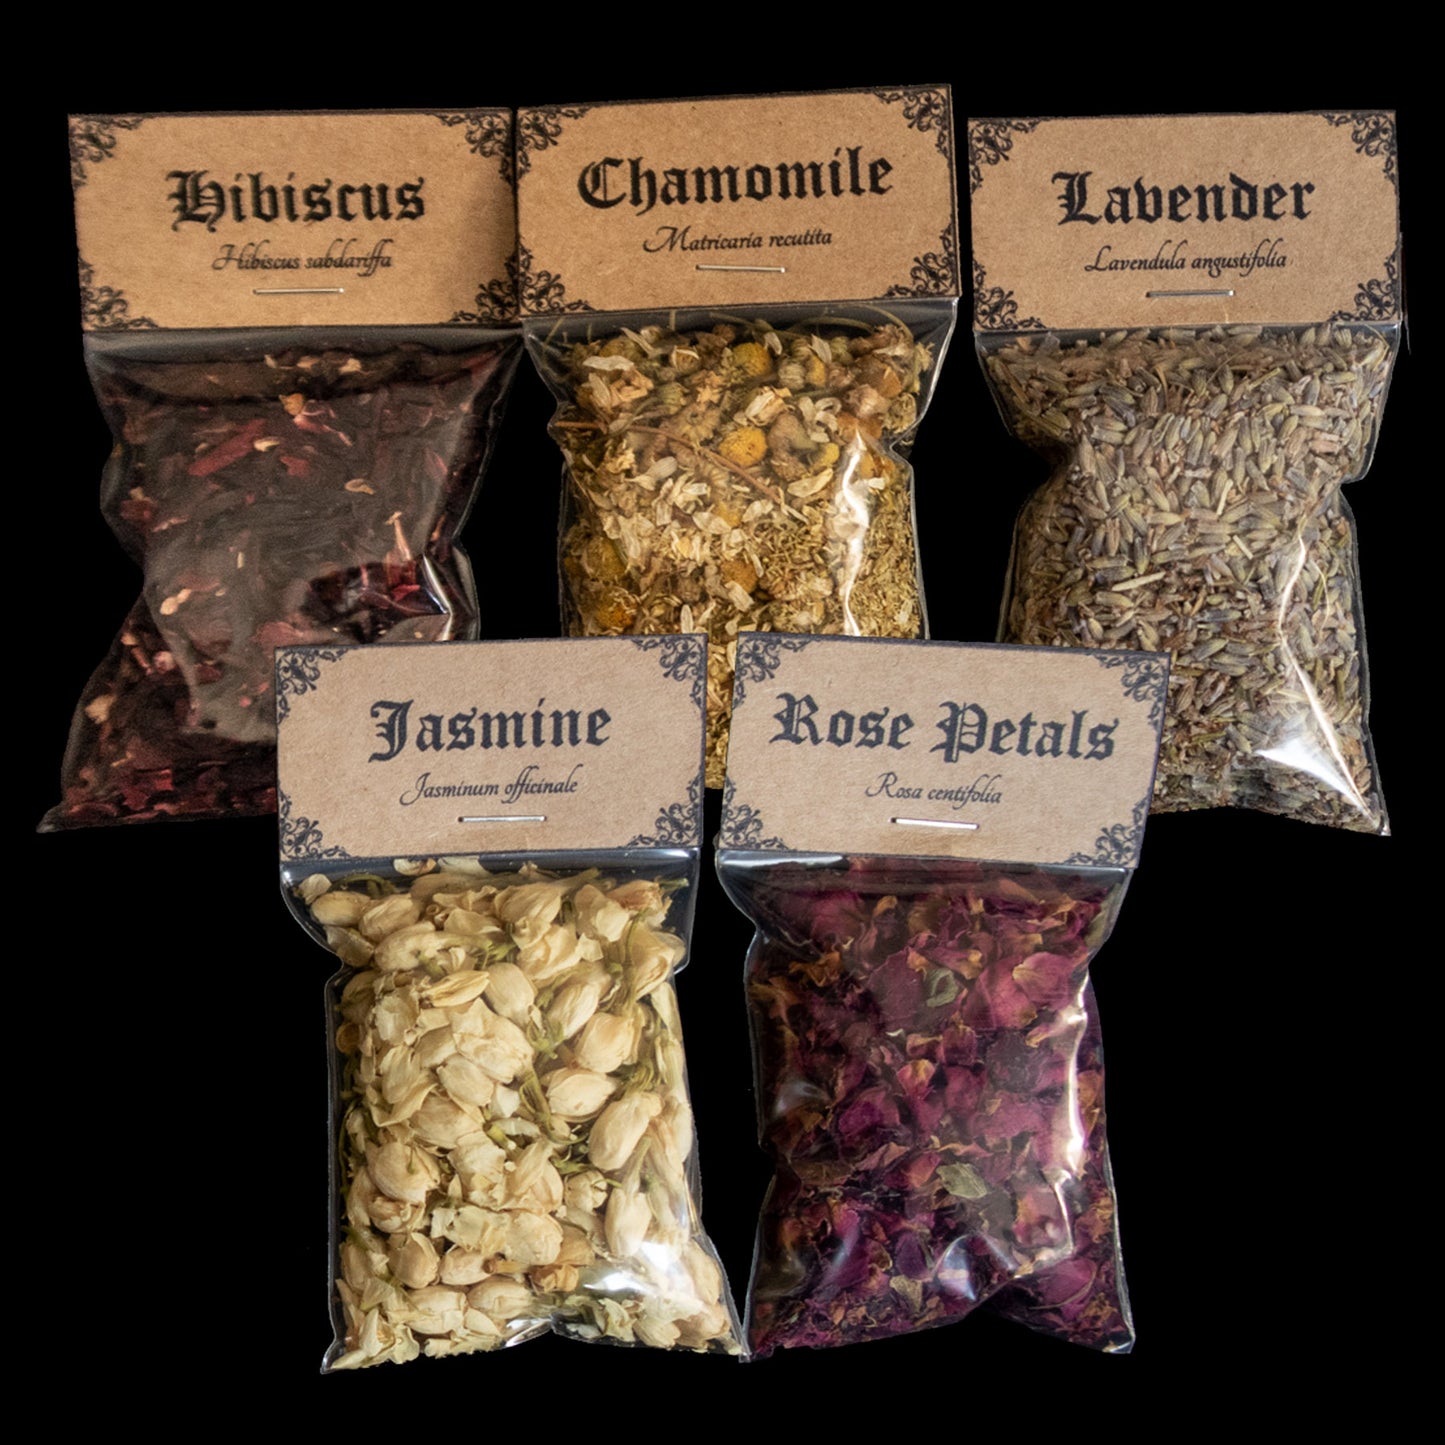 A collection of 5 bags of herbs - Victorian-apothecary-style brown labels at the top give the common and Latin names